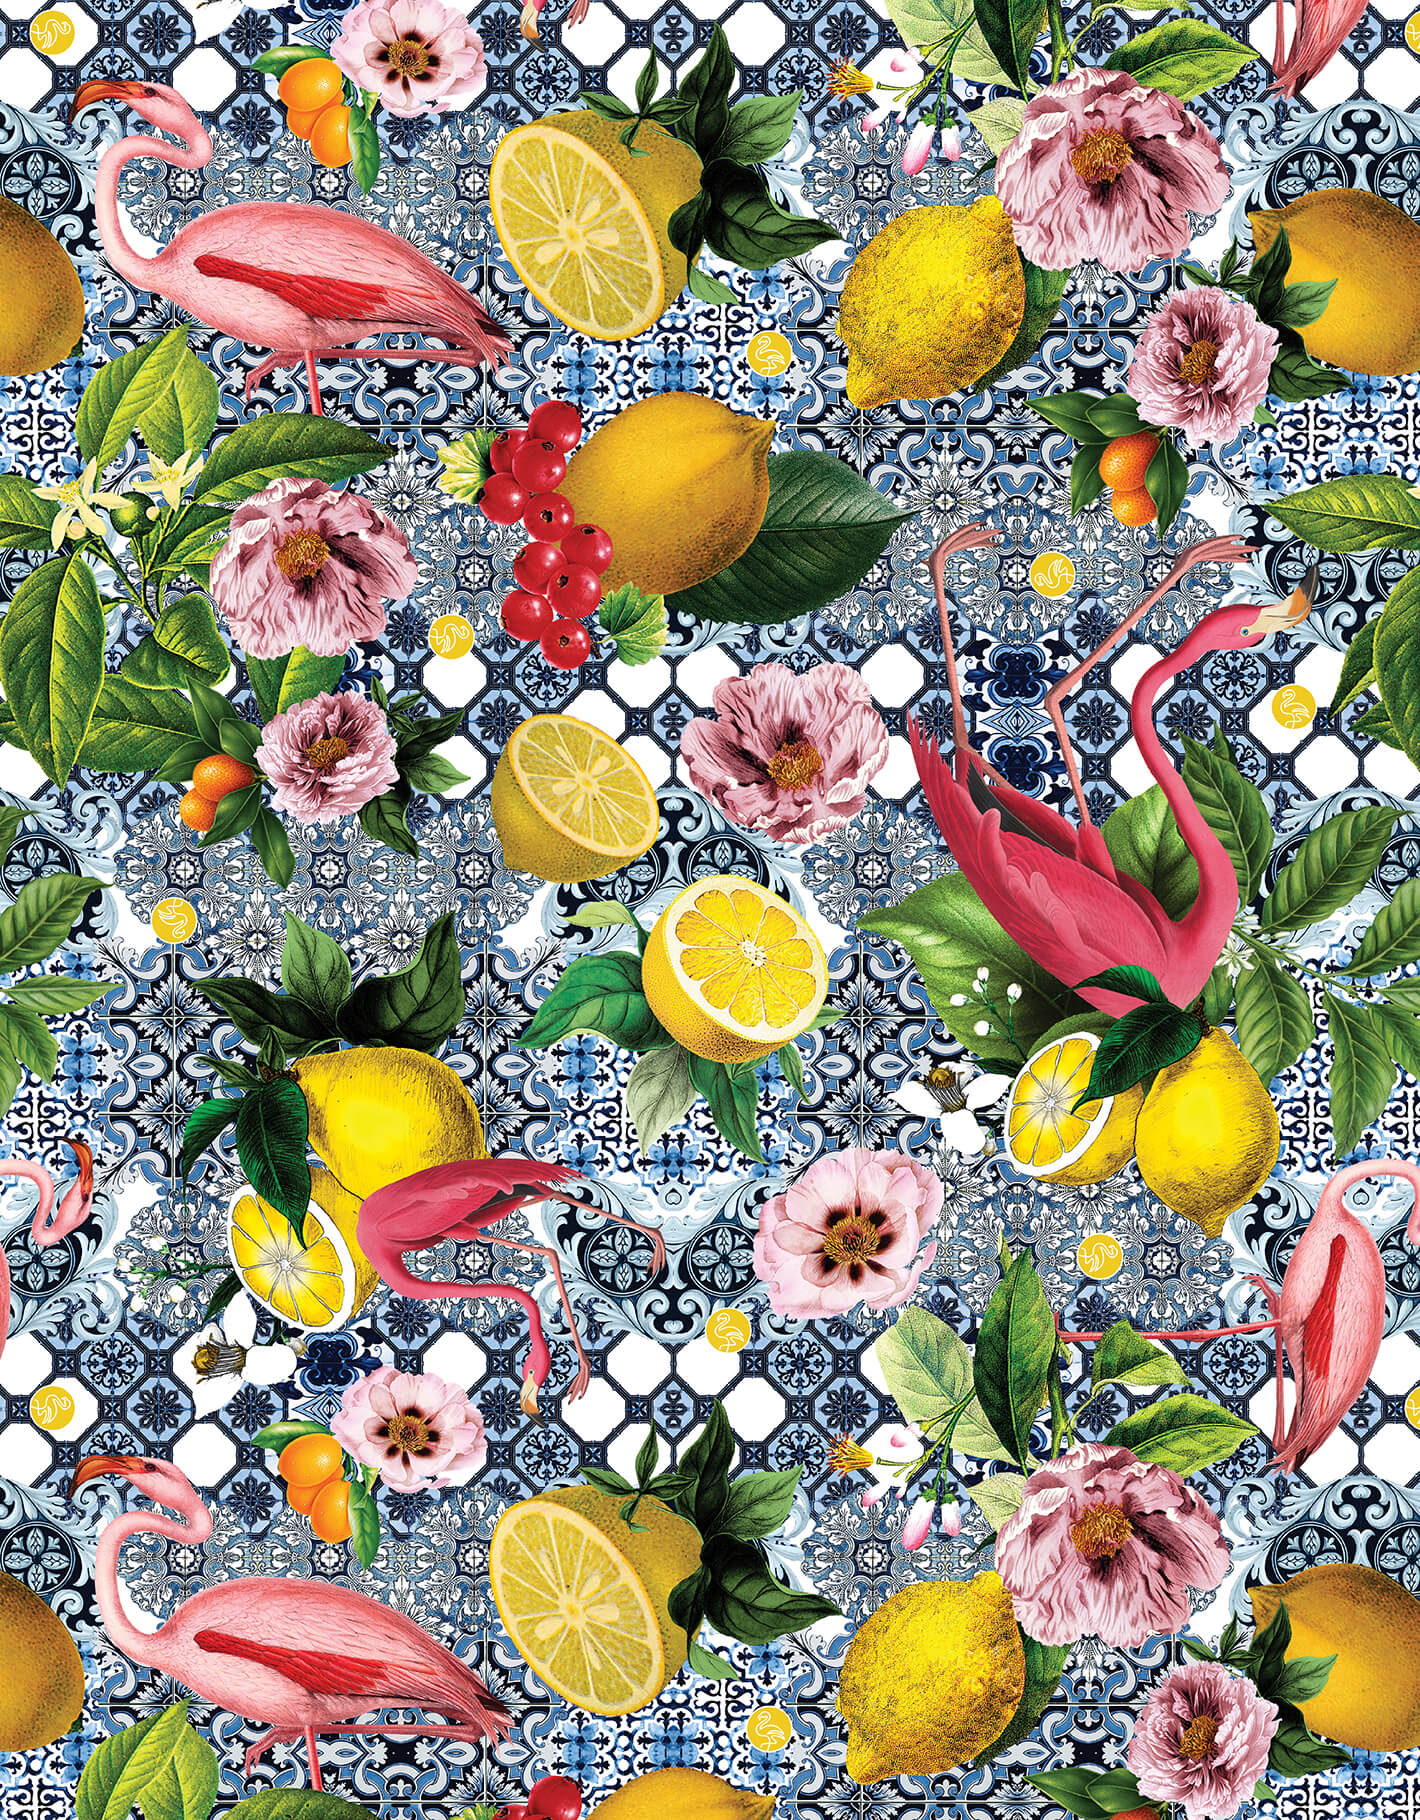 Flamingo, lemons and flowers on blue tiles form the surface pattern design of this wicker darling scarf